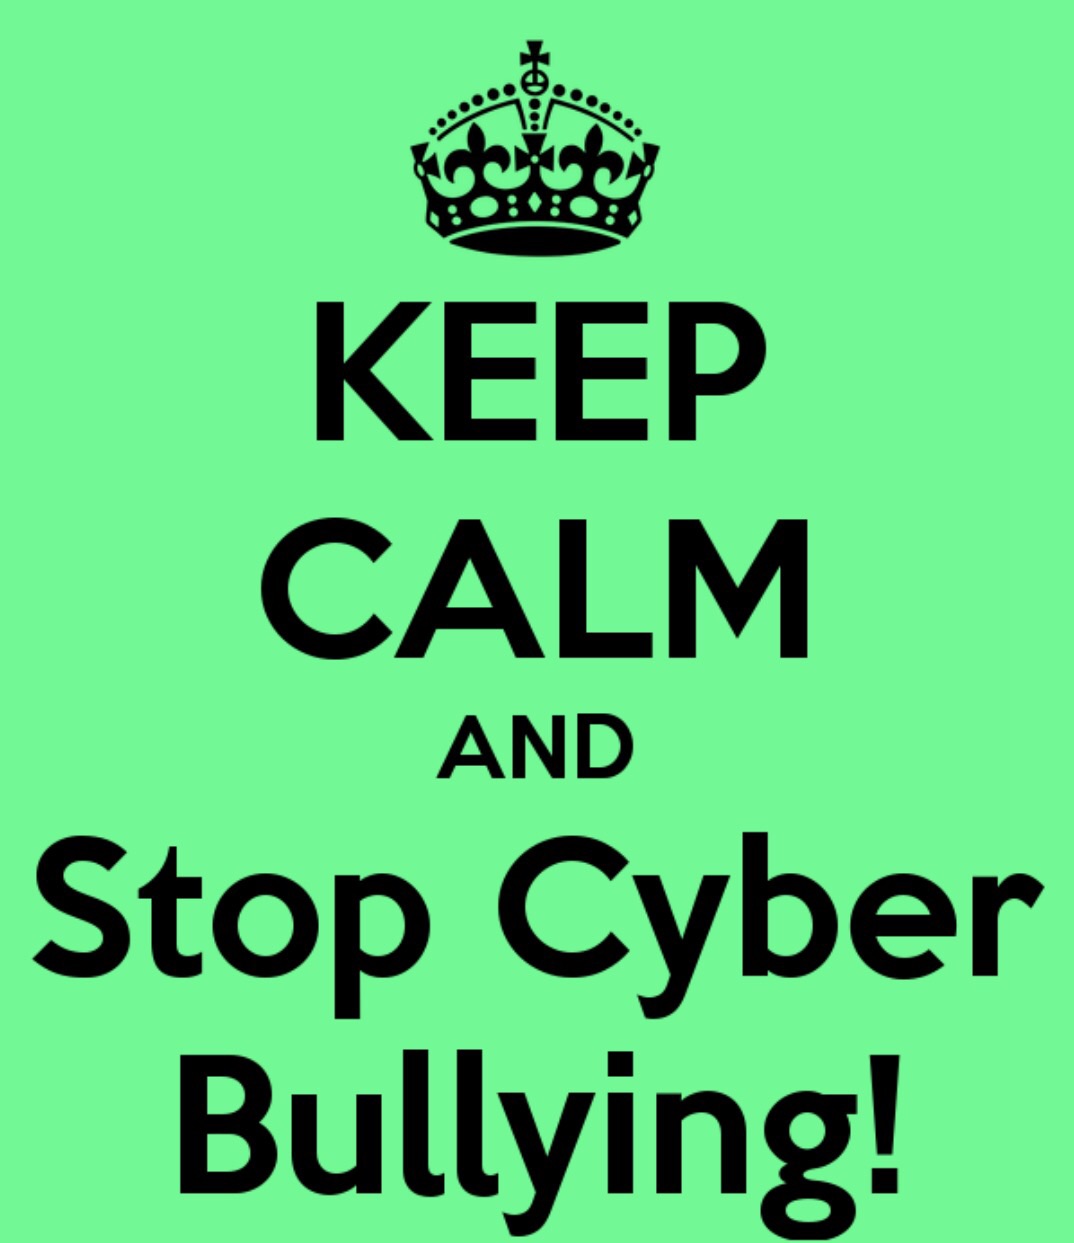 Quotes about Cyber bullying (45 quotes)